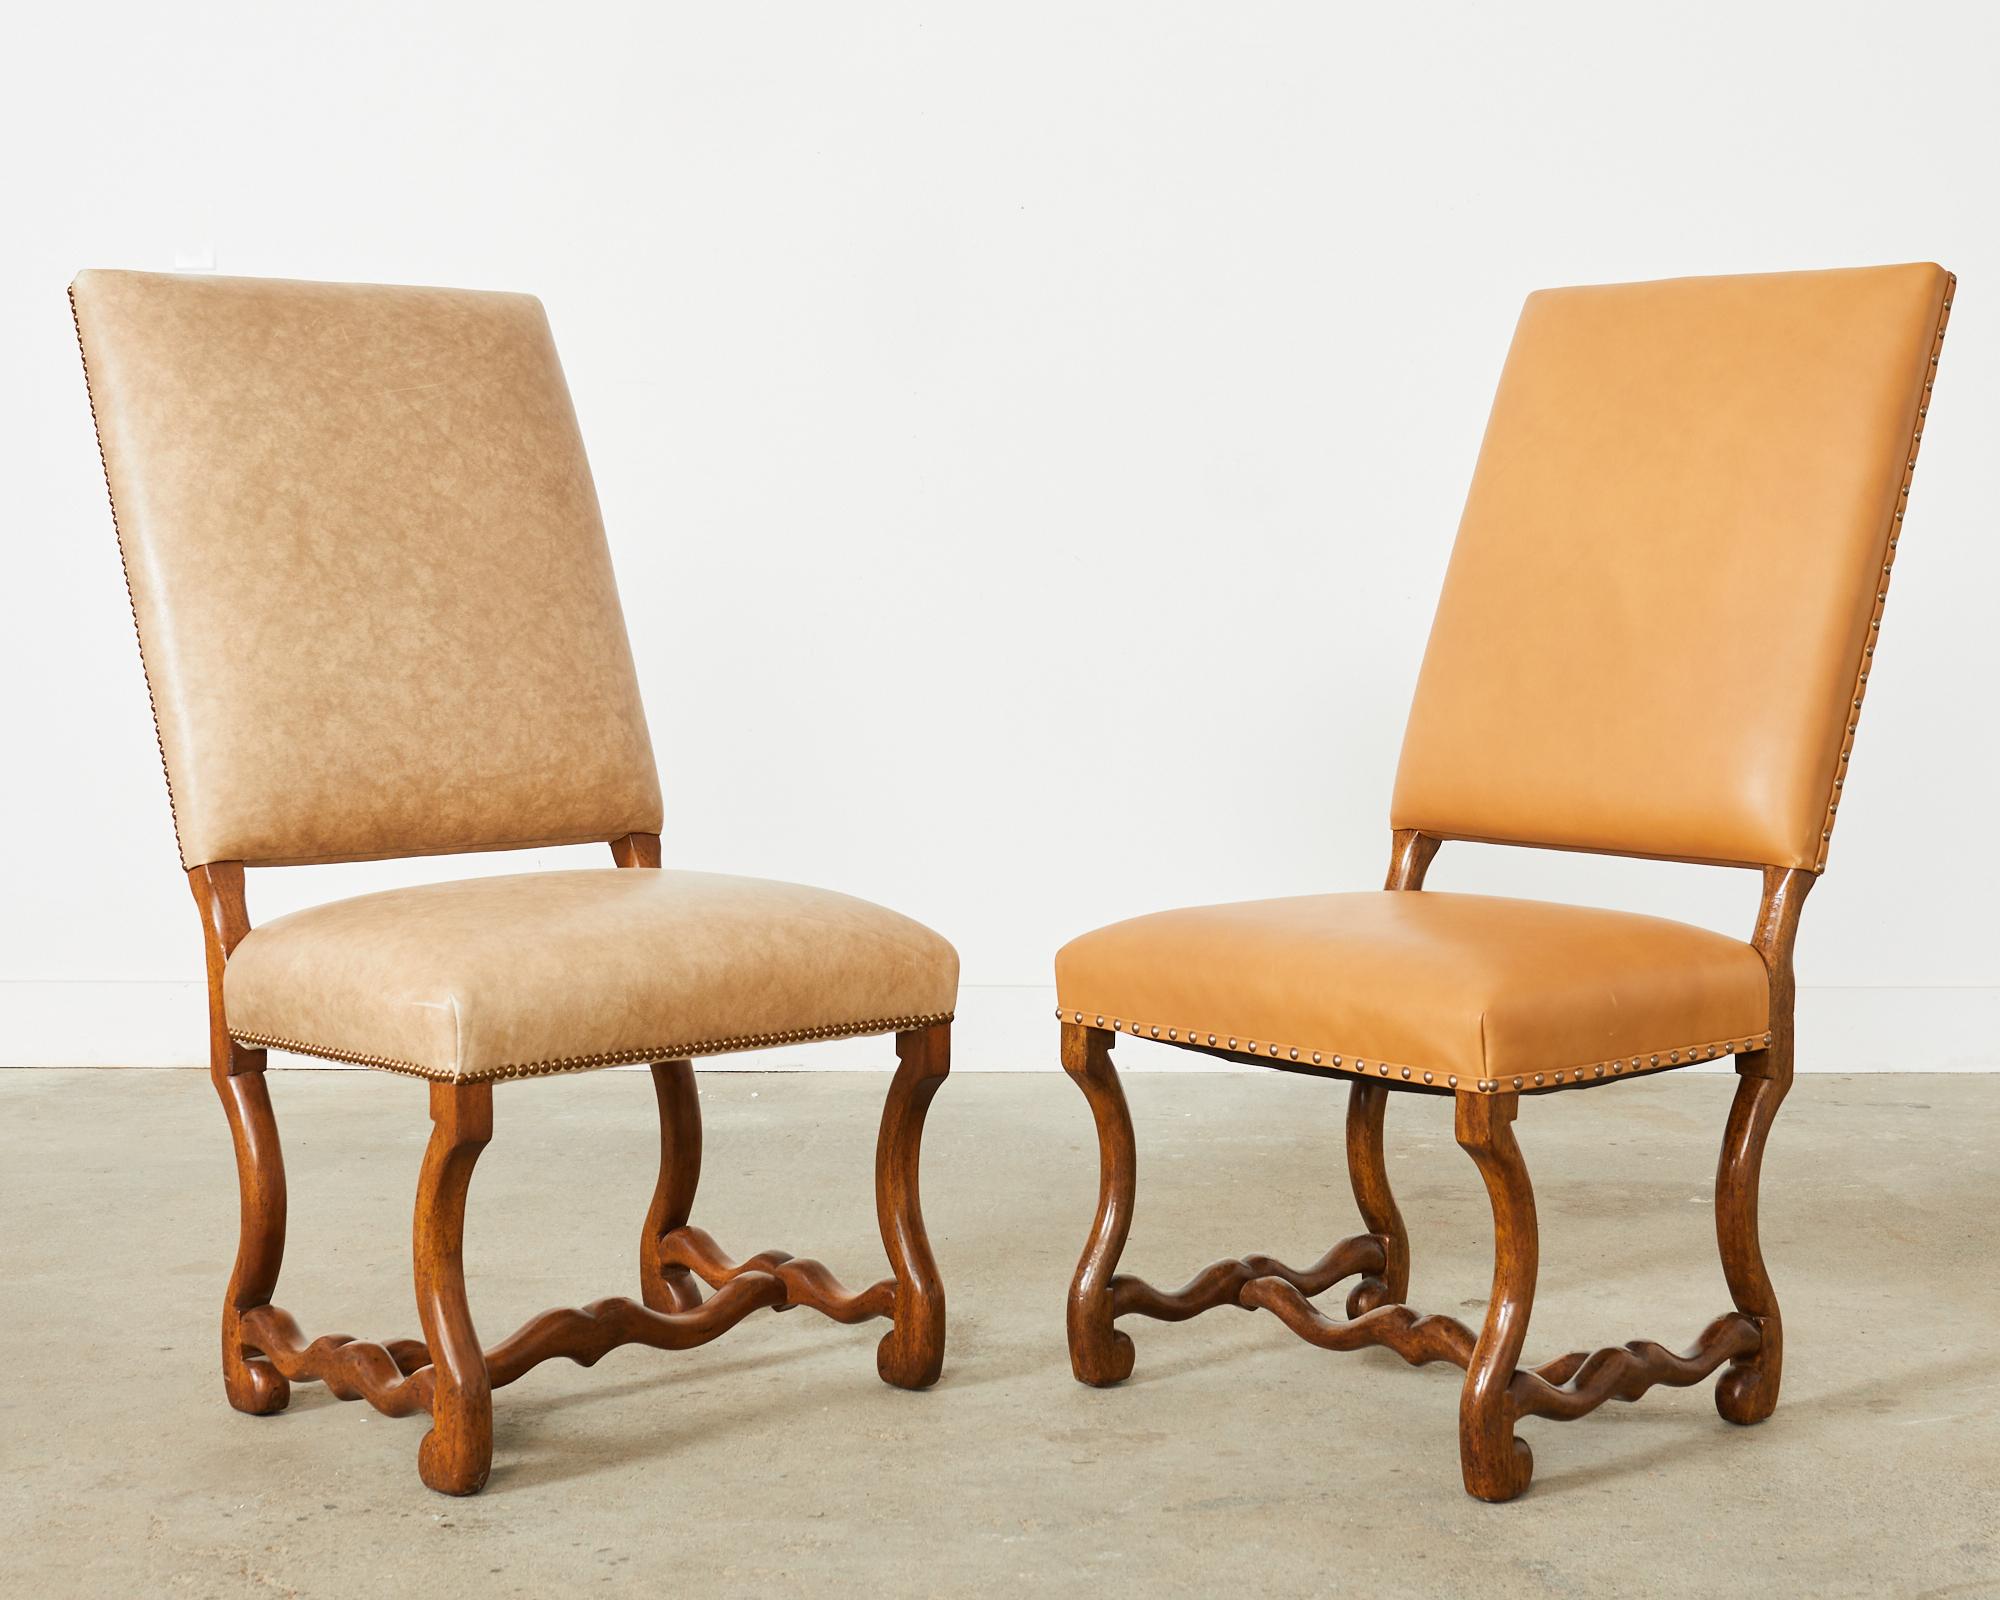 Patinated Pair of Dennis & Leen Louis XIV Os de Mouton Hall Chairs For Sale